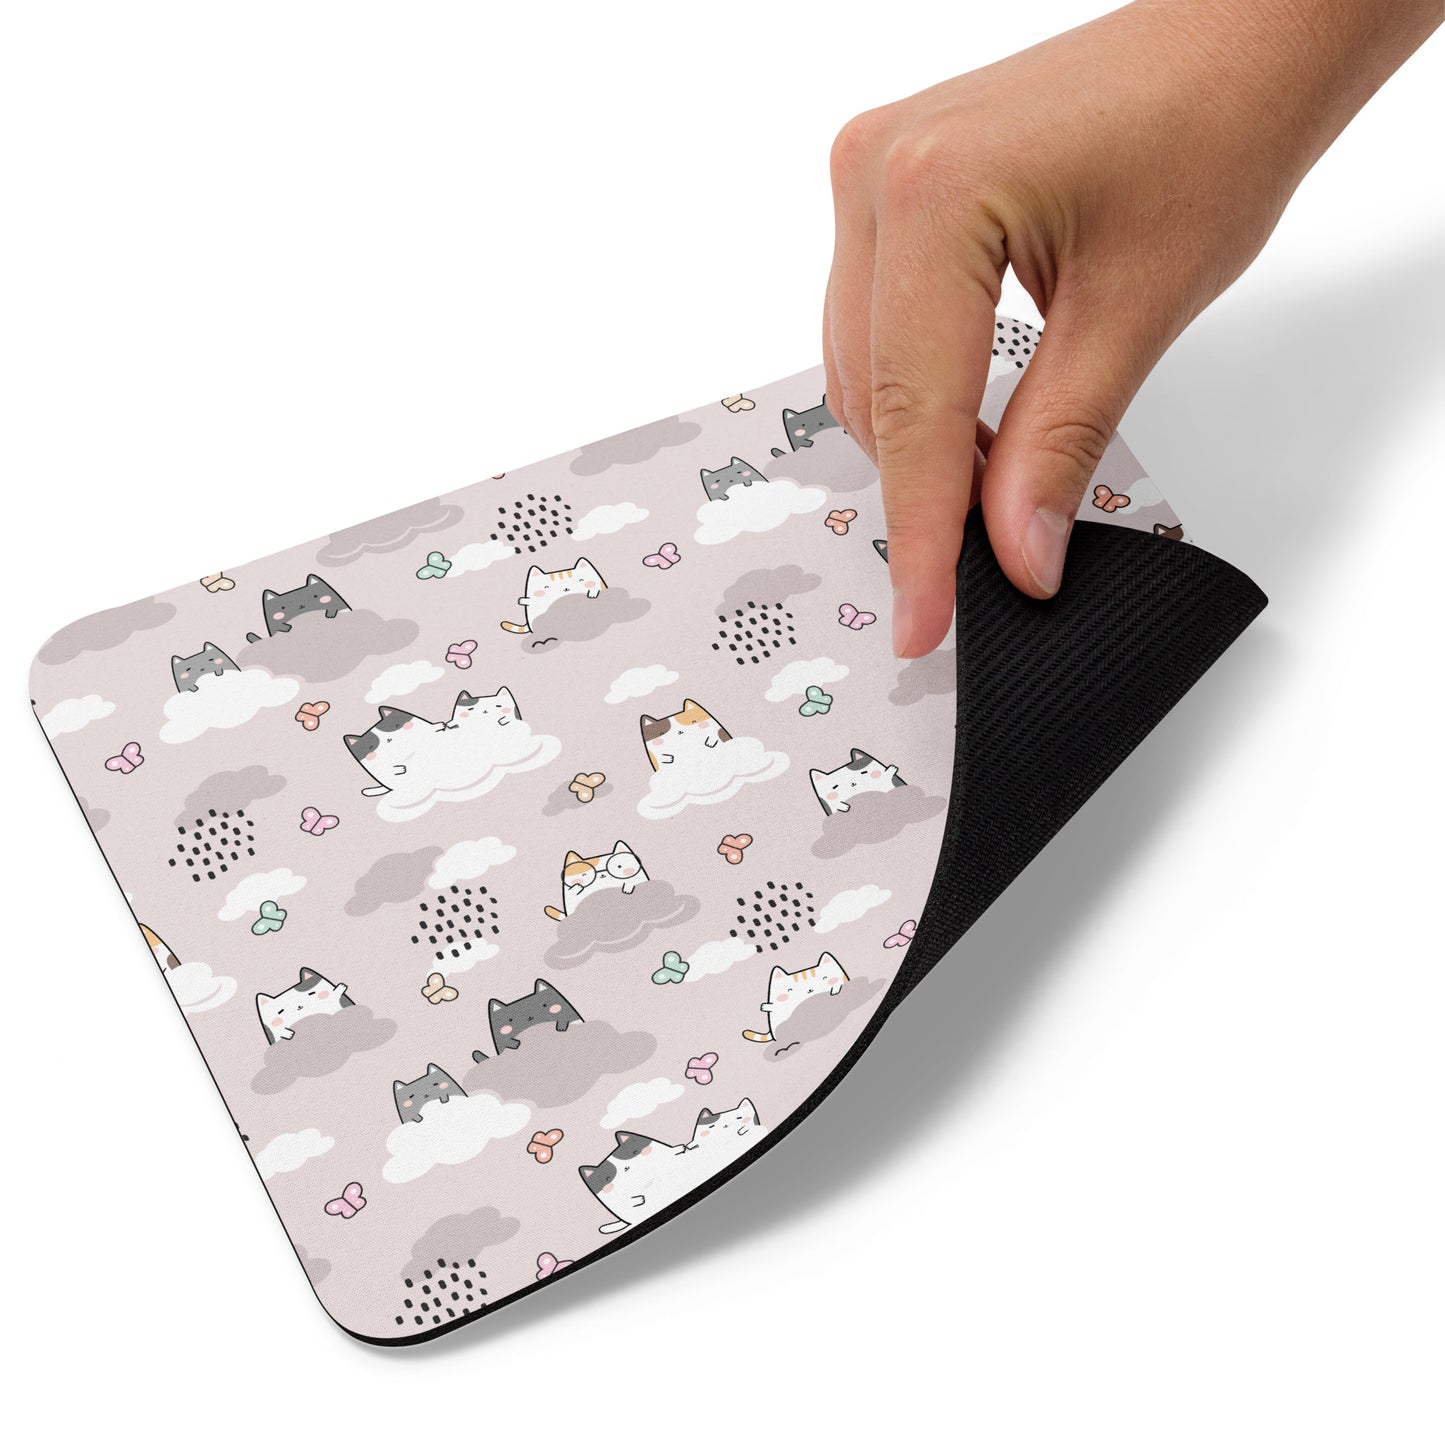 Pastel Cats Cute Kawaii Gaming Mouse pad, Computer Keyboard Office Accessories, Cute Office Decor